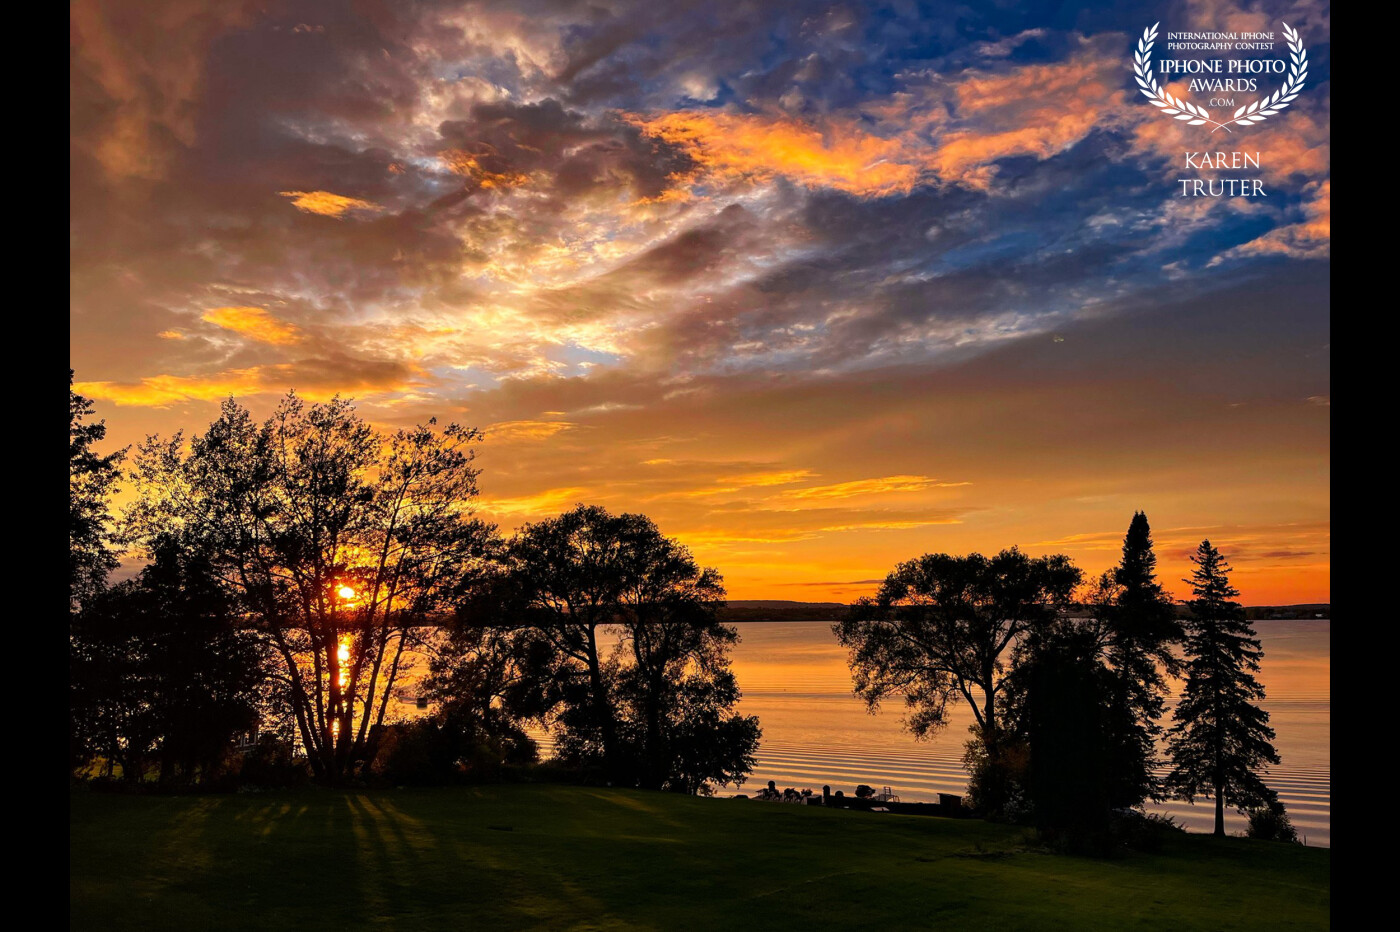 Sunset over Bay of Quinte, Ontario Canada<br />
I watched in awe as this magnificent sky developed and increased in beauty as the sun set behind the trees, casting shadows across the lawn…